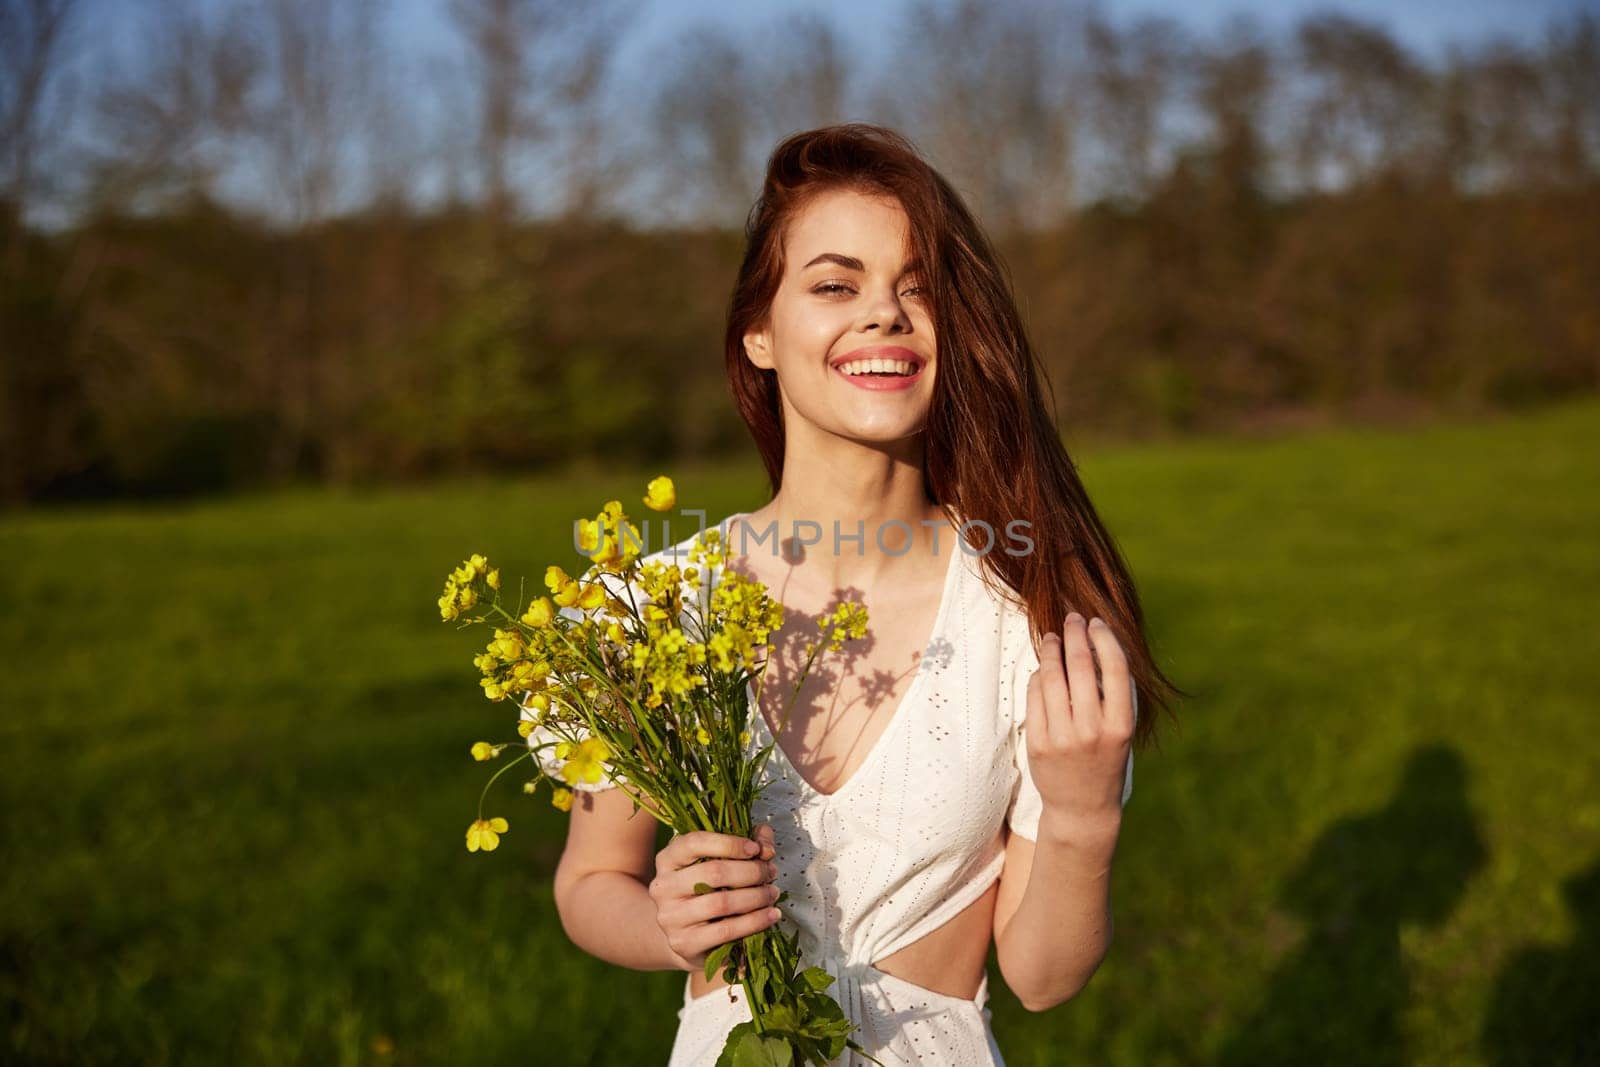 Beautiful woman in a white dress with a bouquet of yellow wildflowers walking in a field by Vichizh